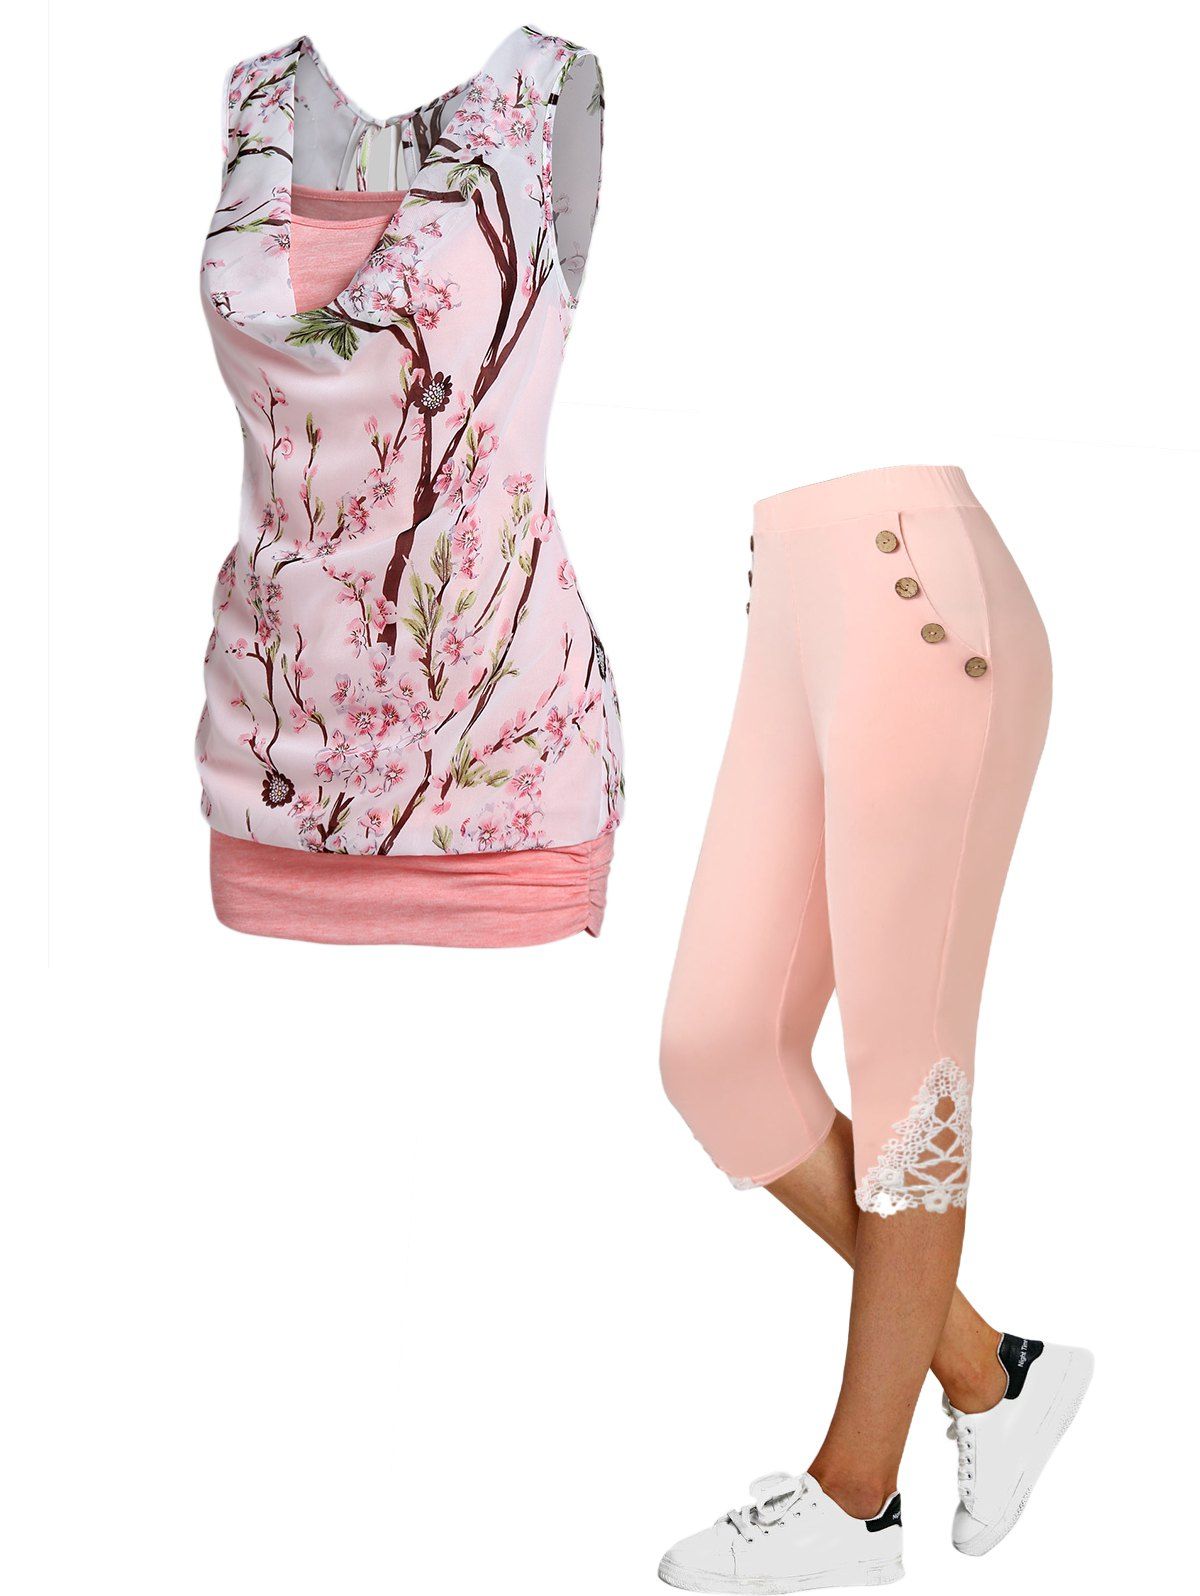 Flower Print Colorblock Chiffon Tank Top And Lace Applique Capri Leggings Casual Outfit - LIGHT PINK S